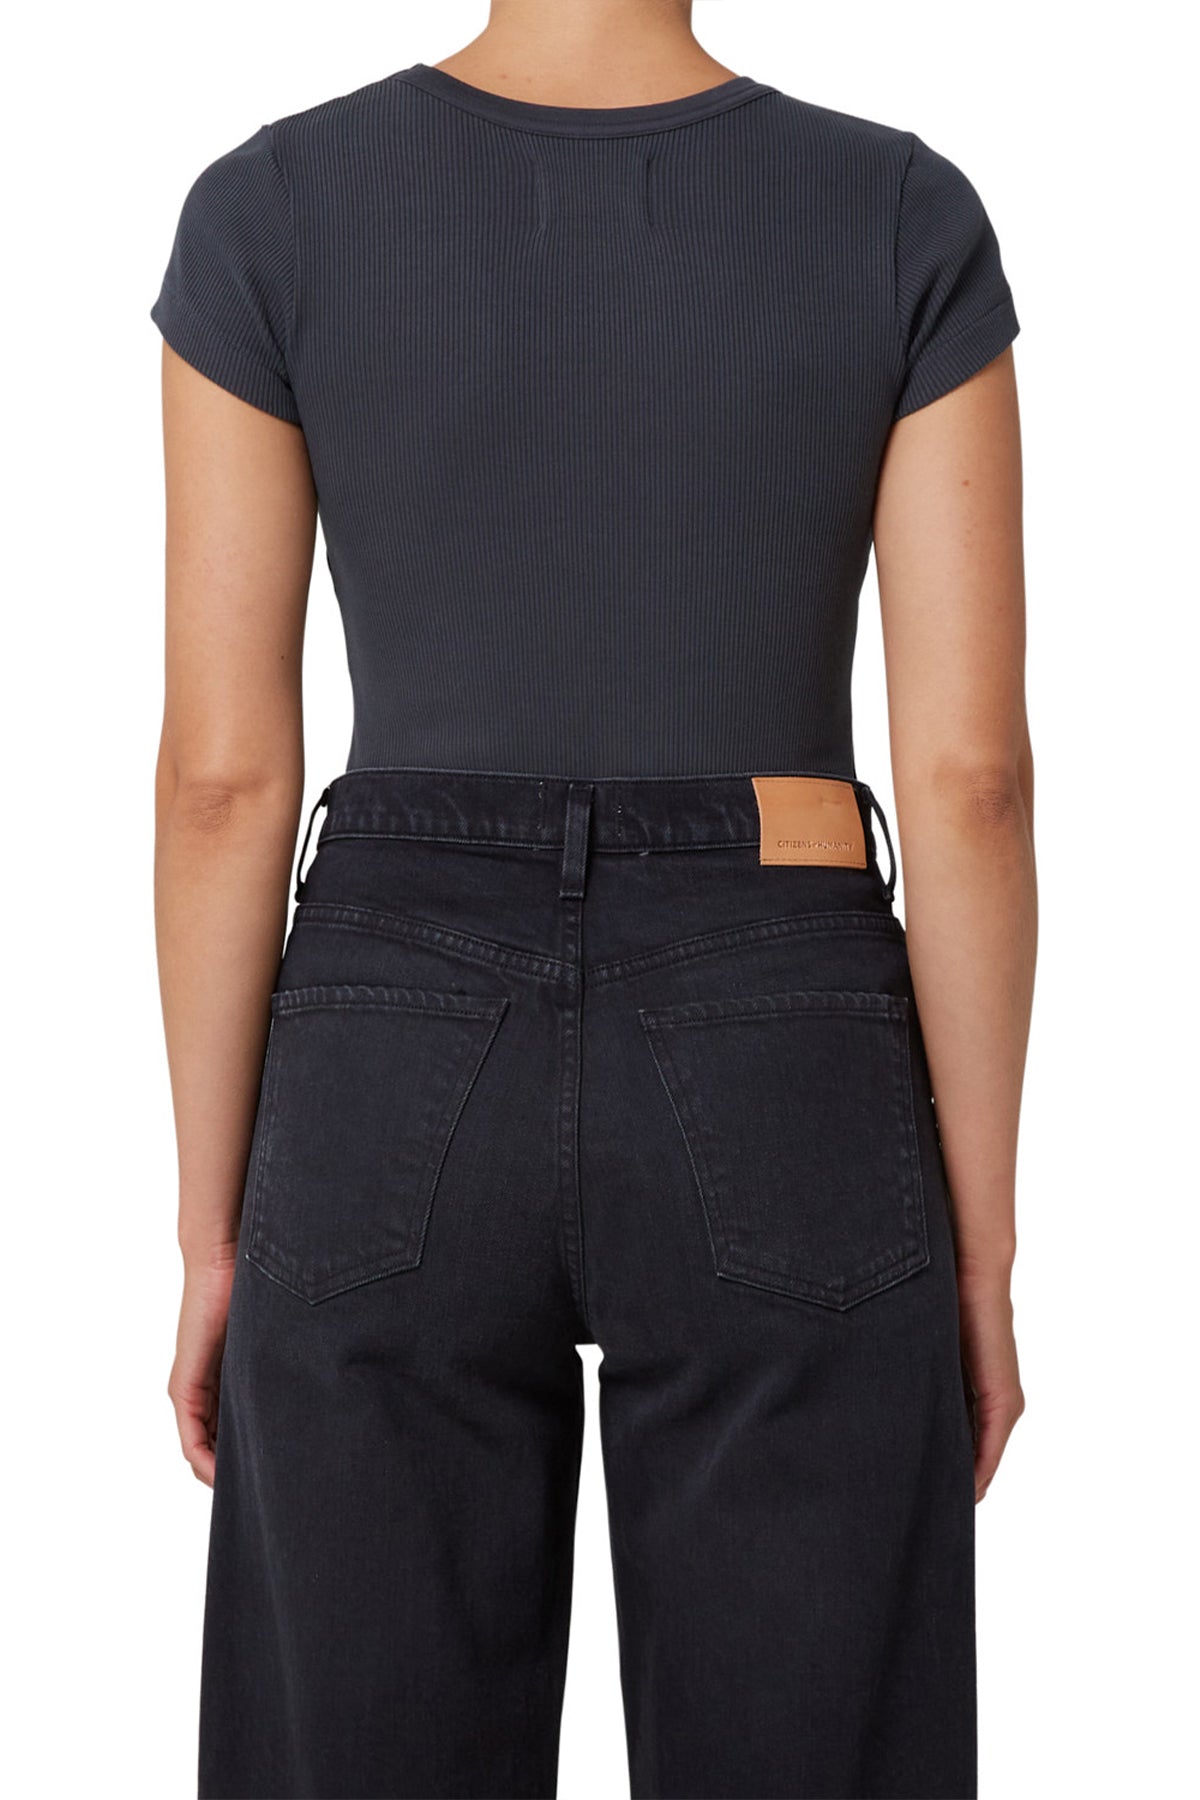 Pierre Tee in Charcoal - shop-olivia.com